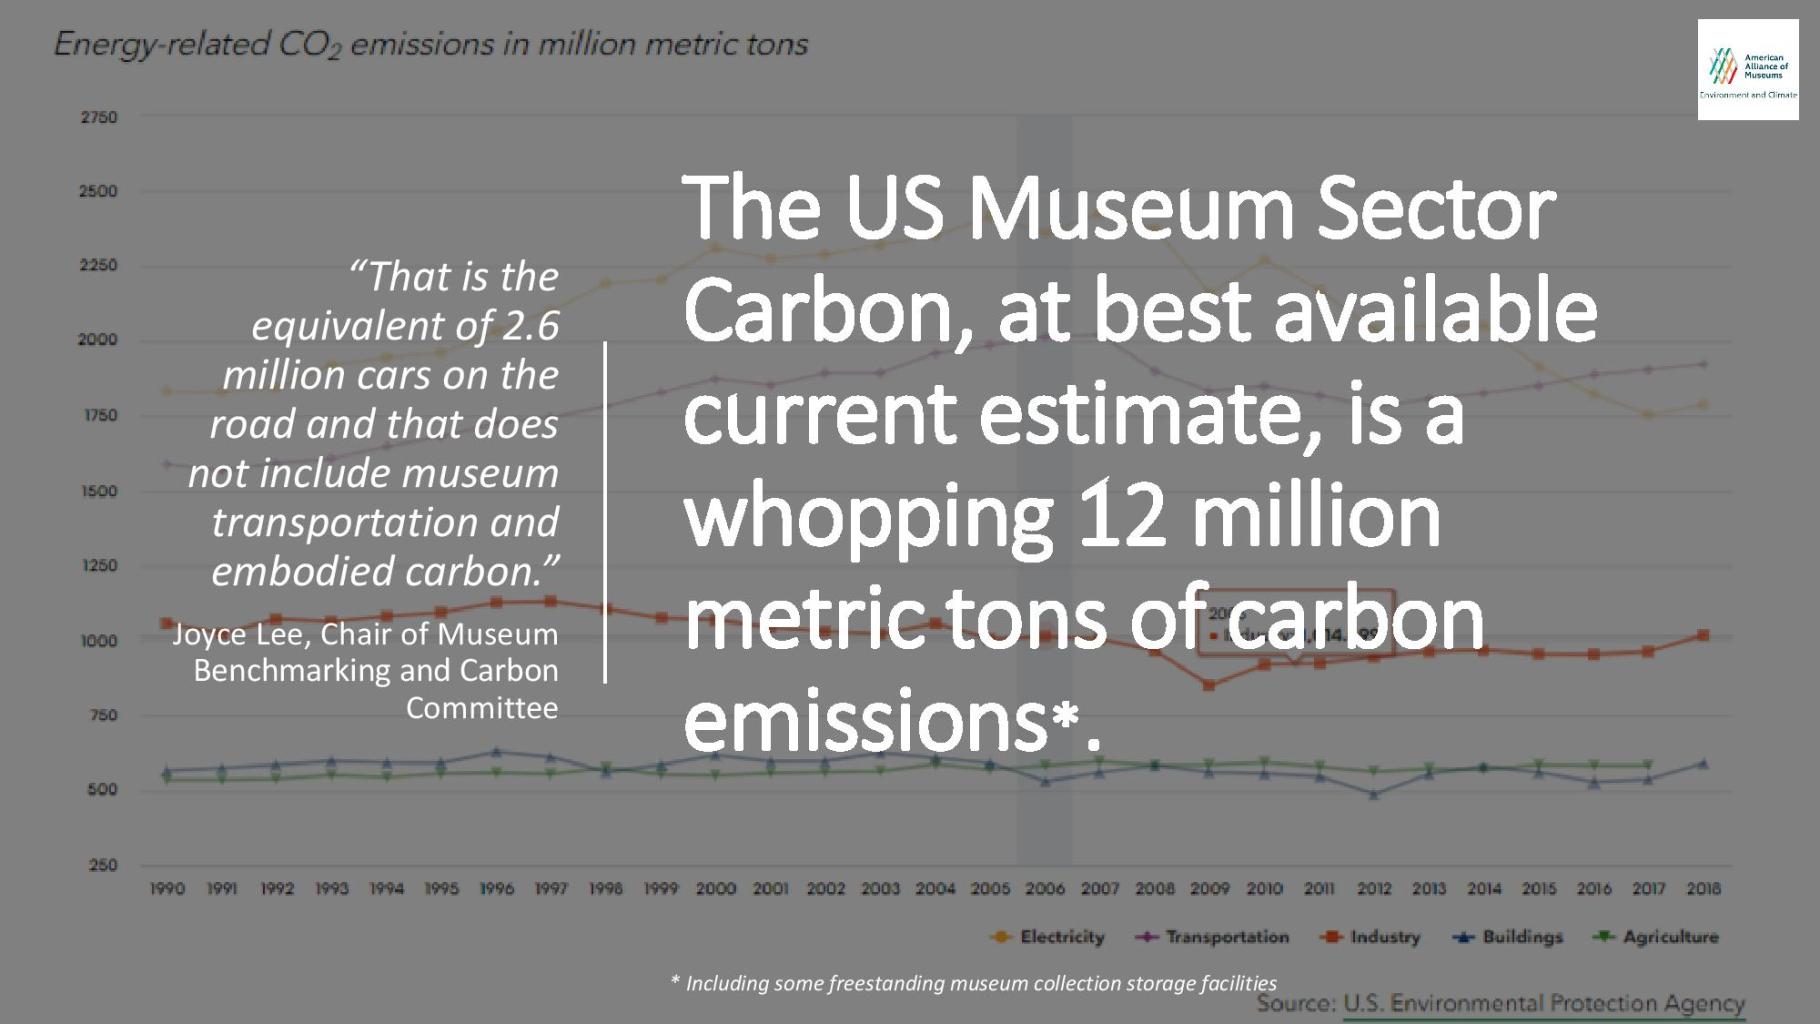 A graphic reading "The US Museum Sector Carbon, at best available current estimate, is a whopping 12 million metric tons of carbon emissions (including some freestanding museum collection storage facilities). That is the equivalent of 2.6 million cars on the road and that does not include museum transportation and embodied carbon.